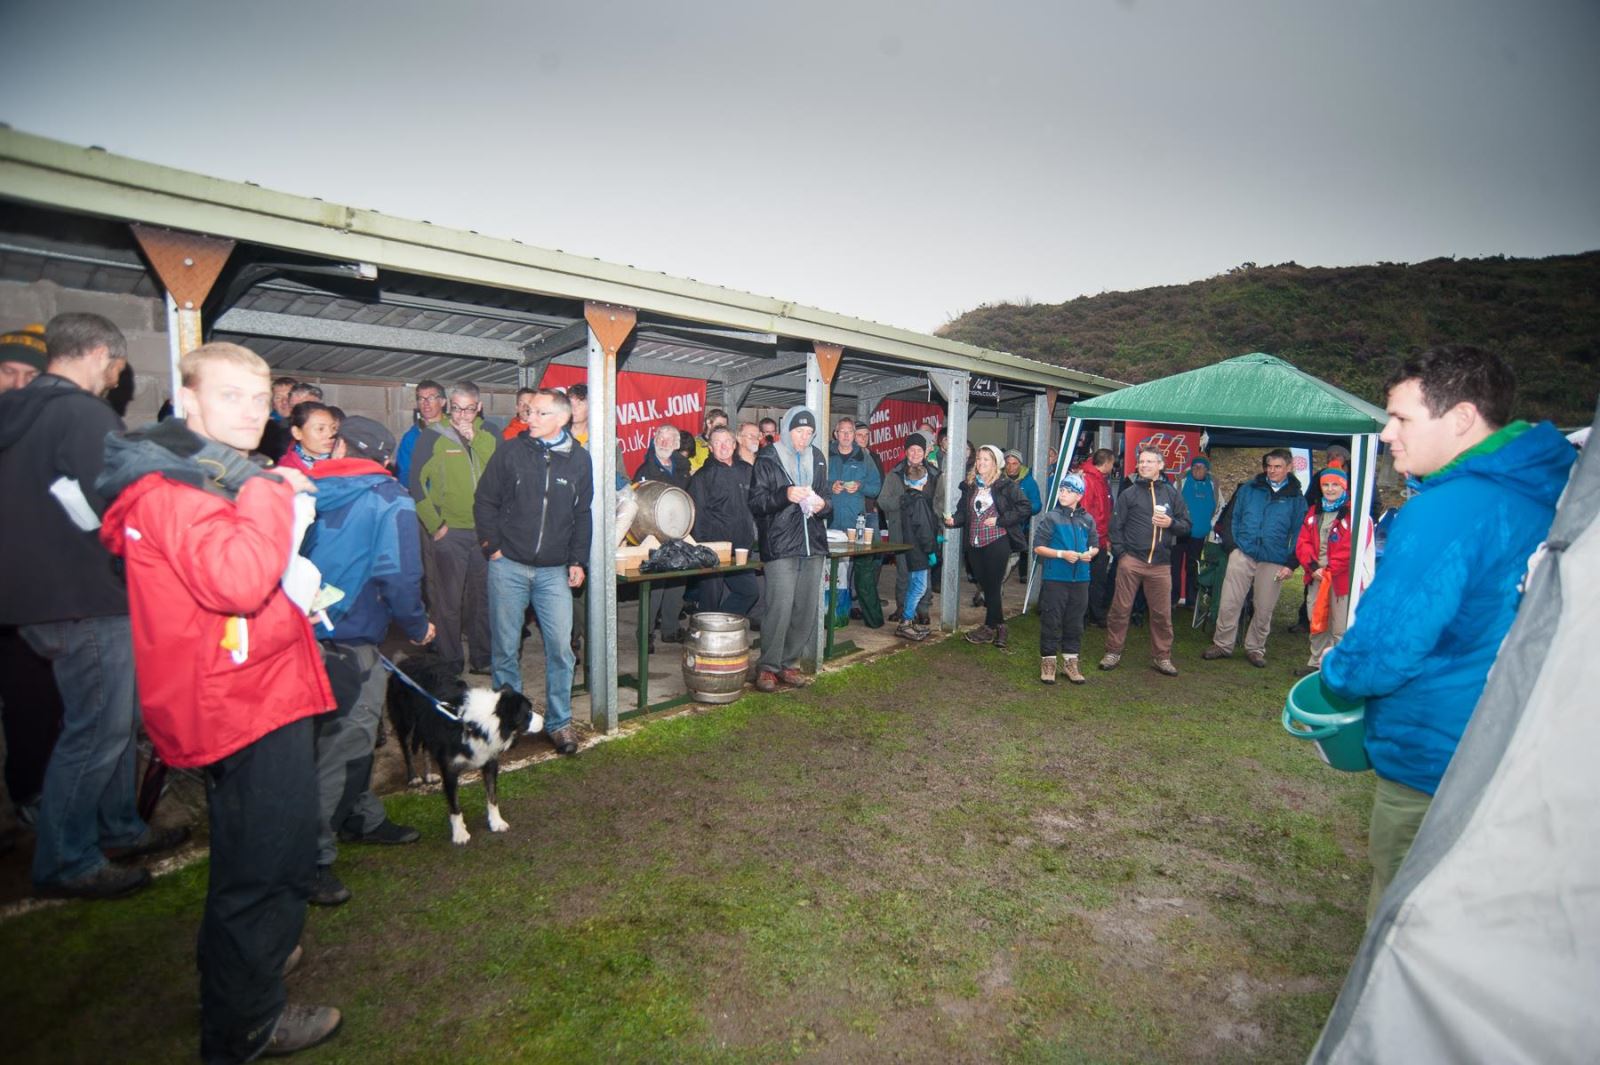 Crowds huddling into shelters, hanging out under tents, sipping warmth from free tea and enjoying the Wiltonfest raffle